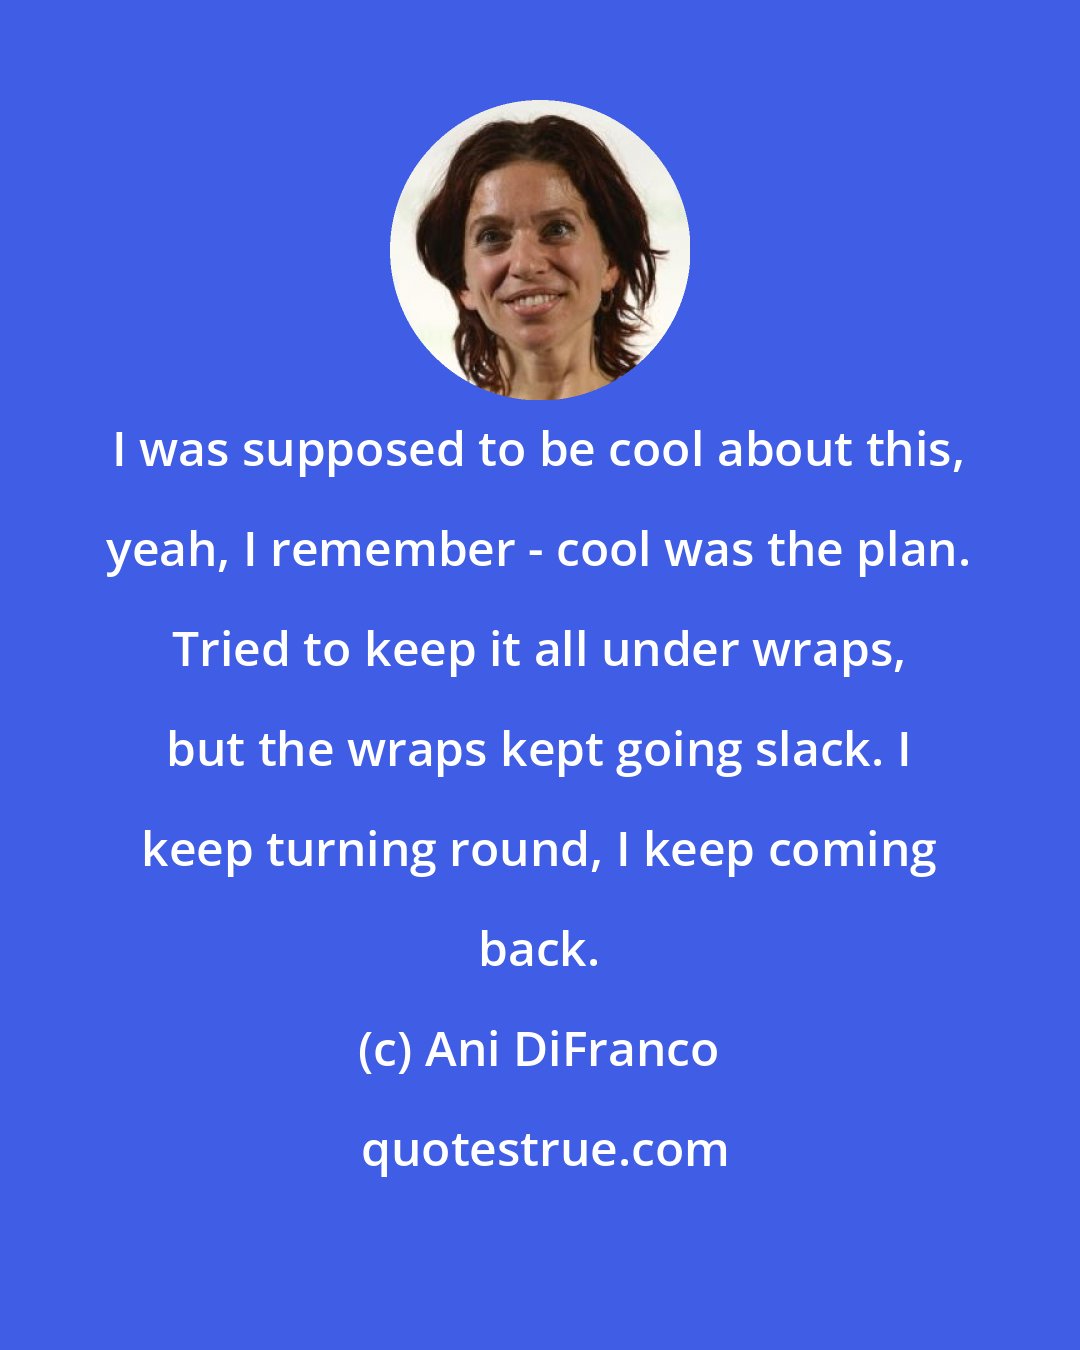 Ani DiFranco: I was supposed to be cool about this, yeah, I remember - cool was the plan. Tried to keep it all under wraps, but the wraps kept going slack. I keep turning round, I keep coming back.